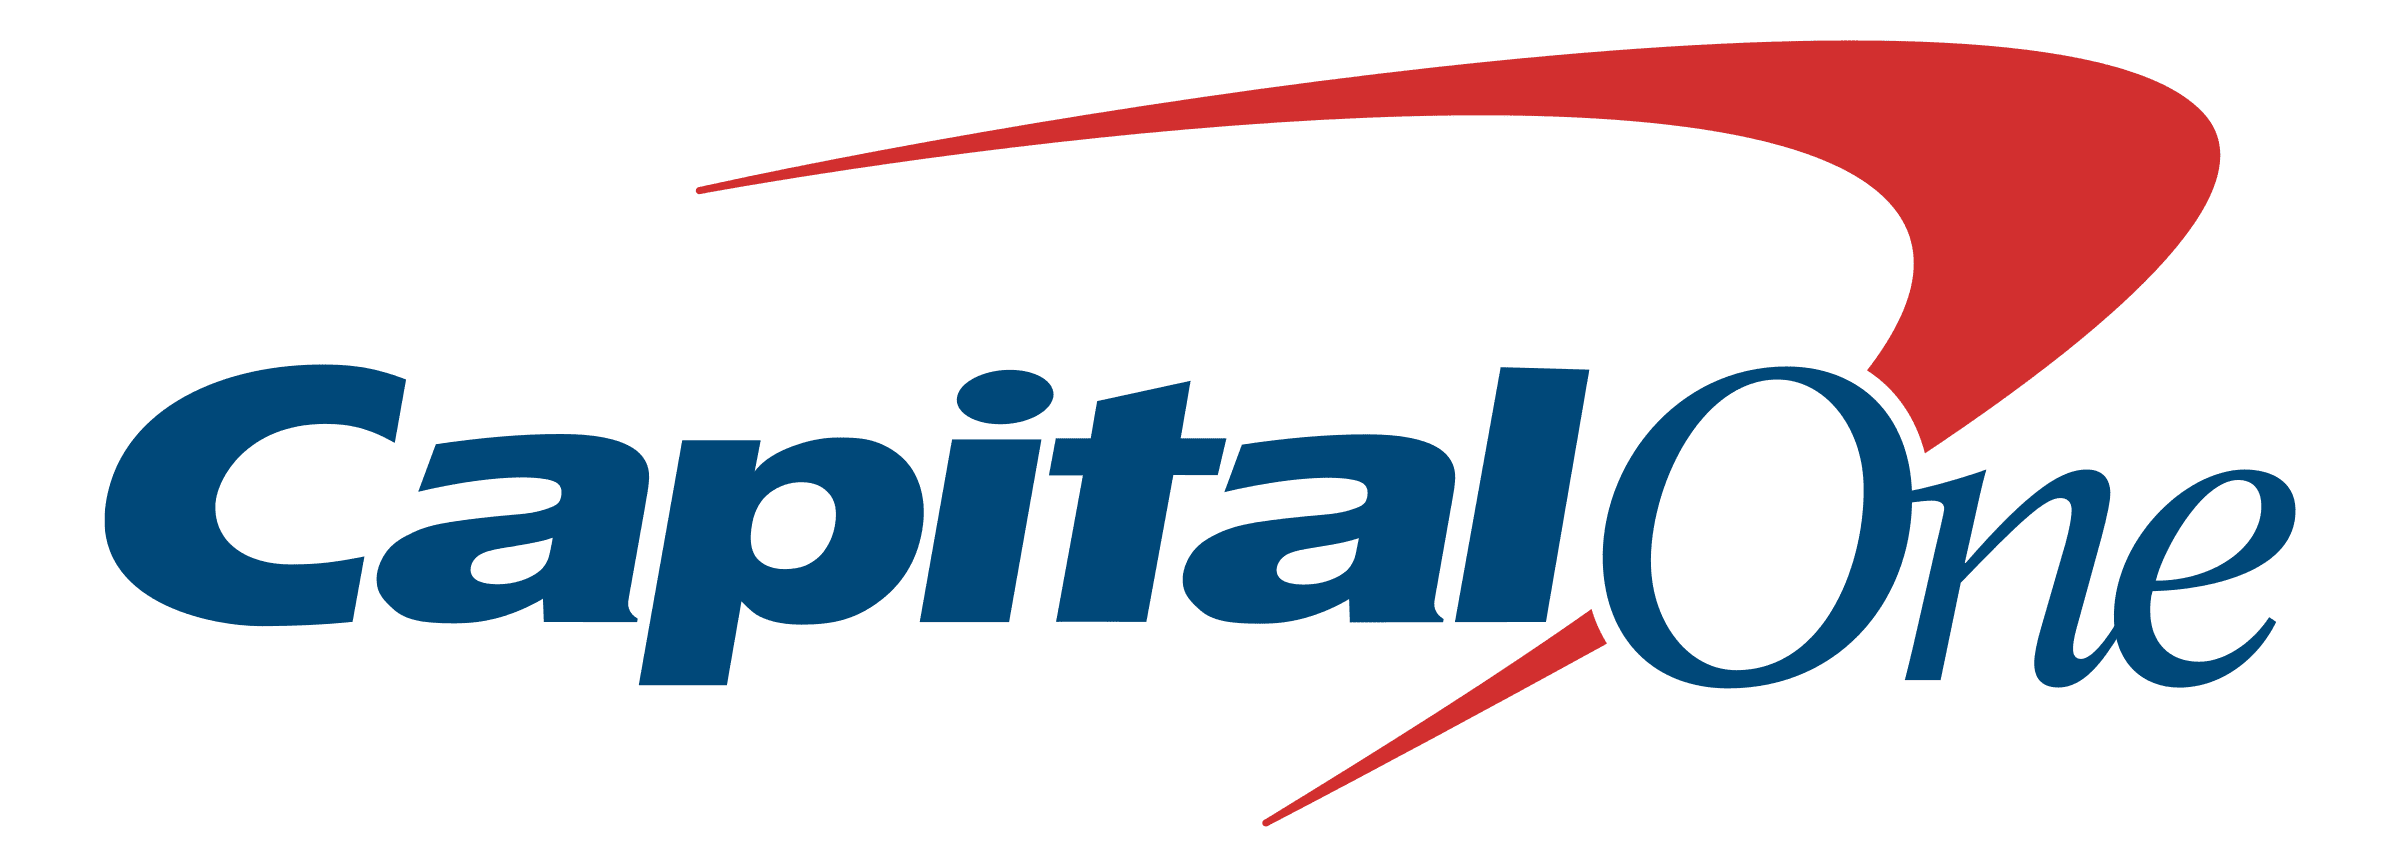 Capital-one-logo.png